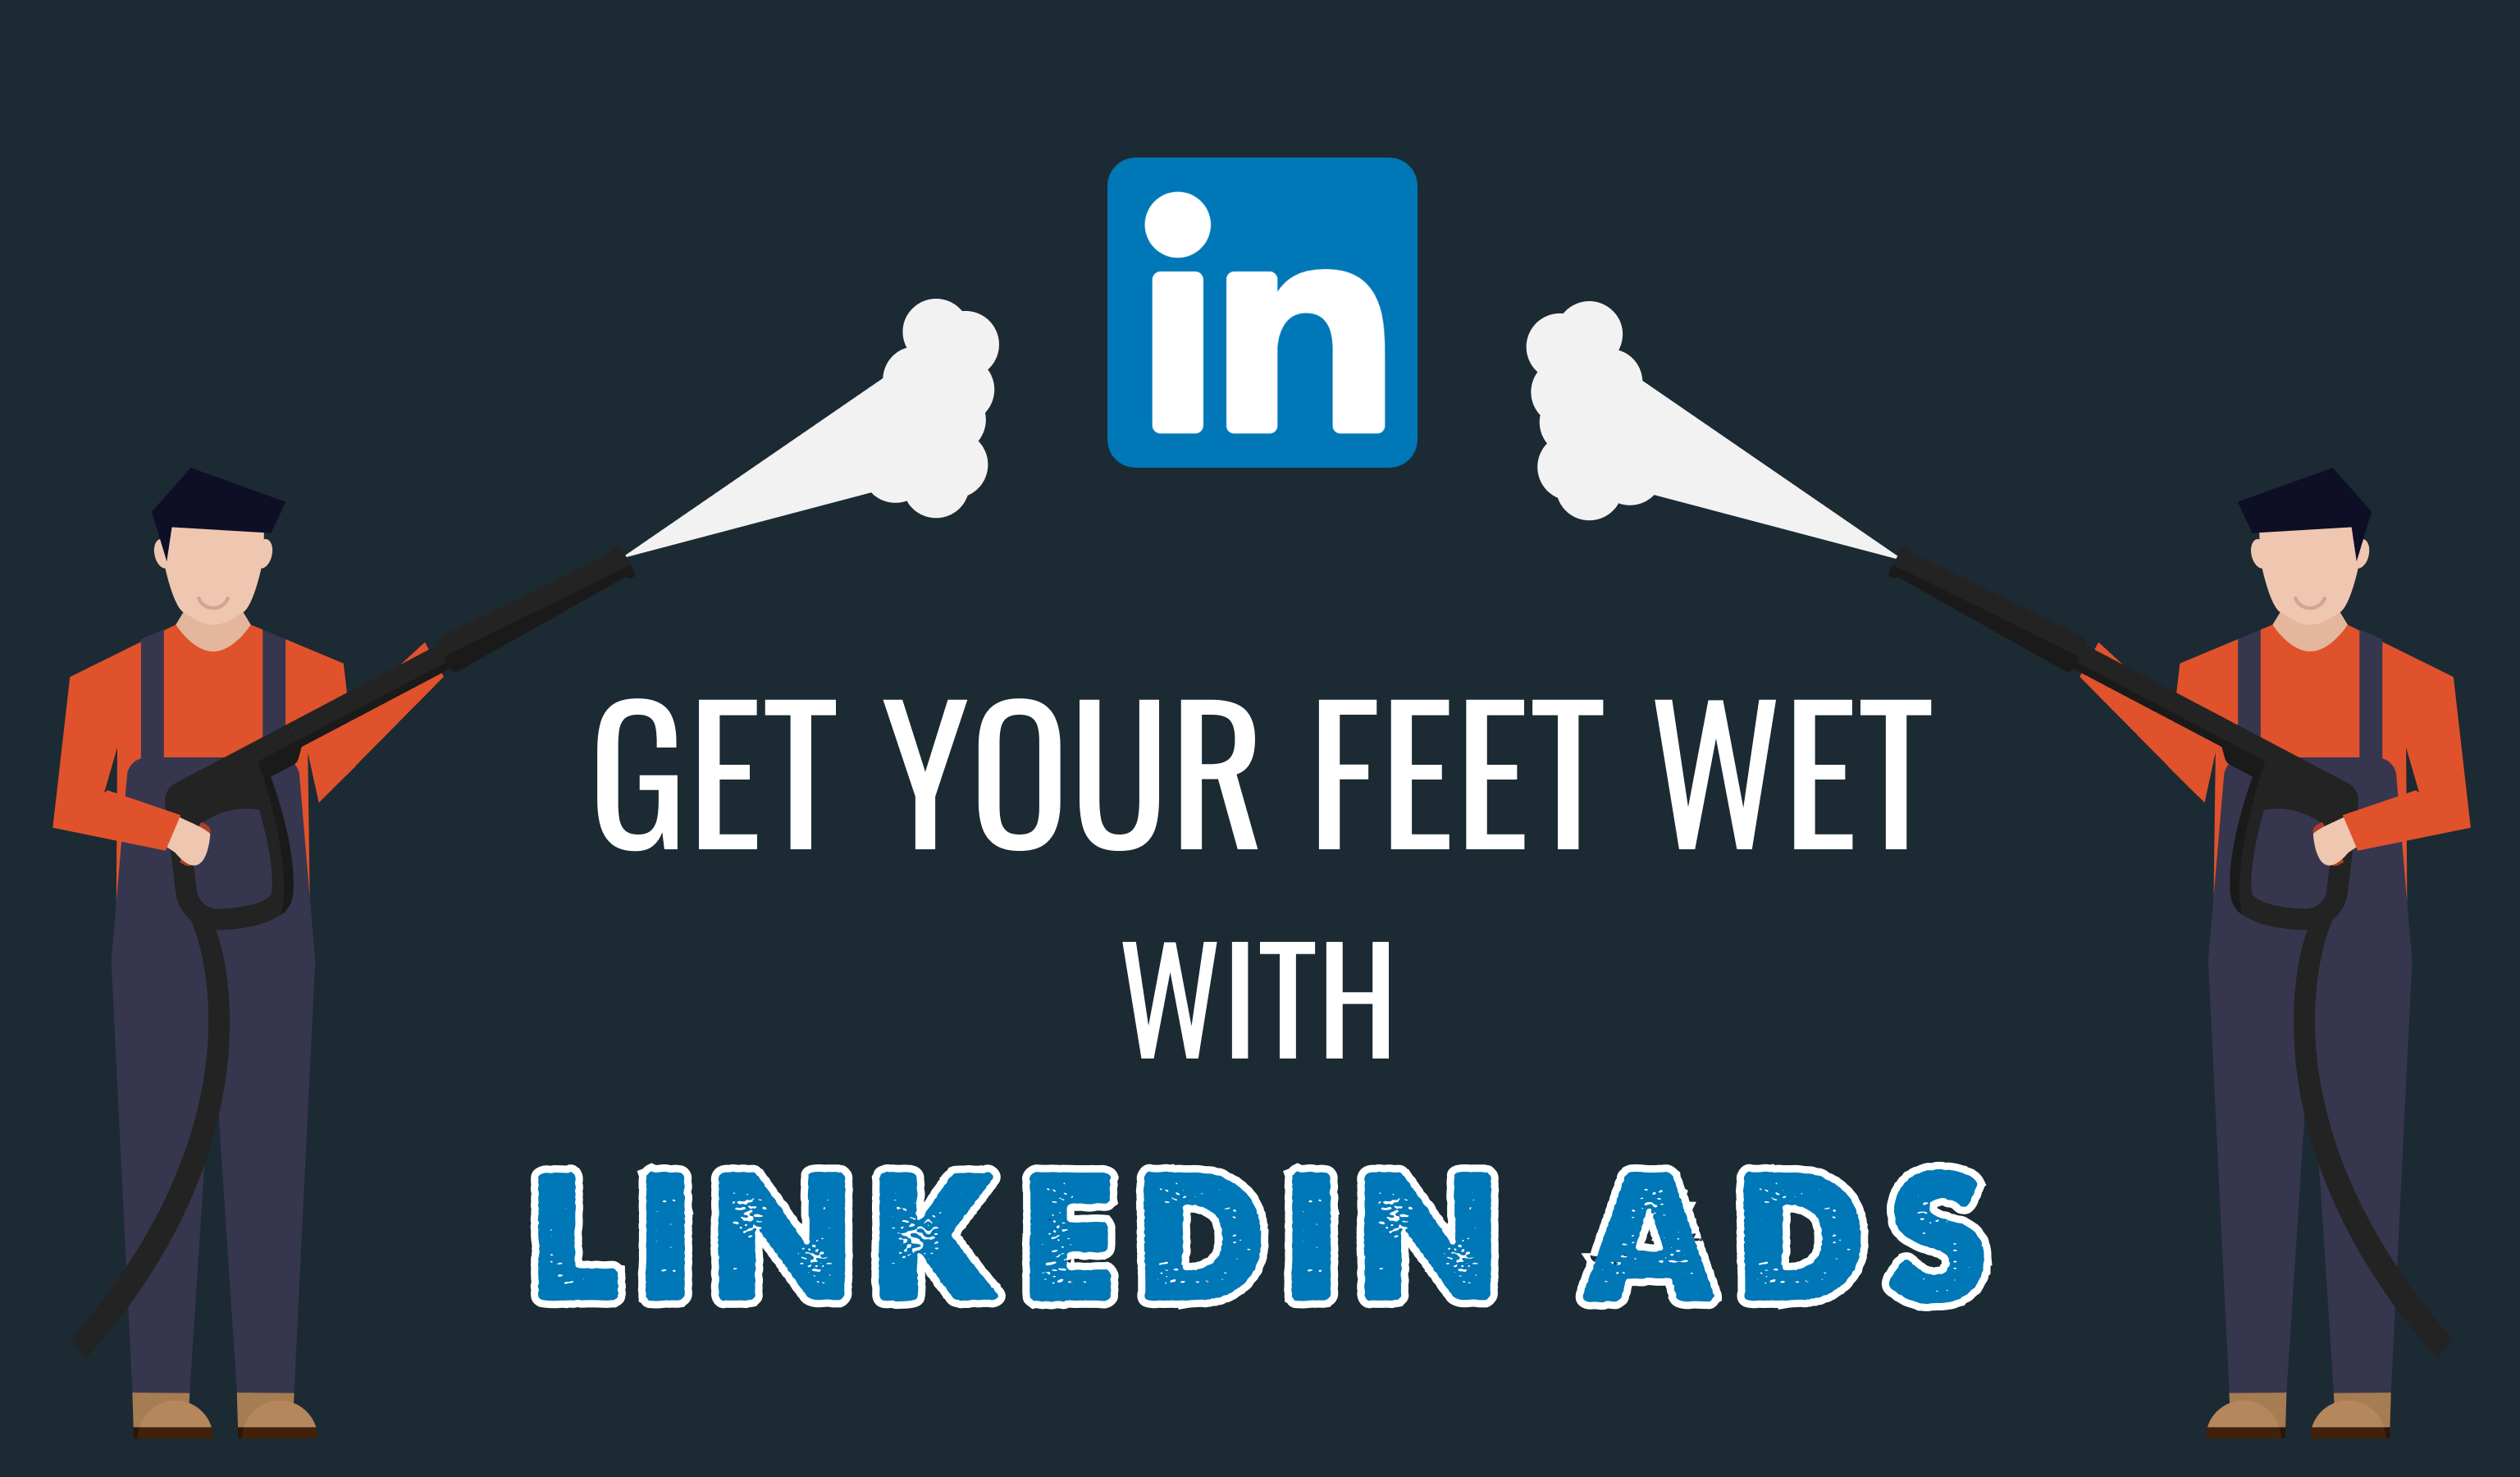 Get Your Feet Wet with LinkedIn Ads blog image